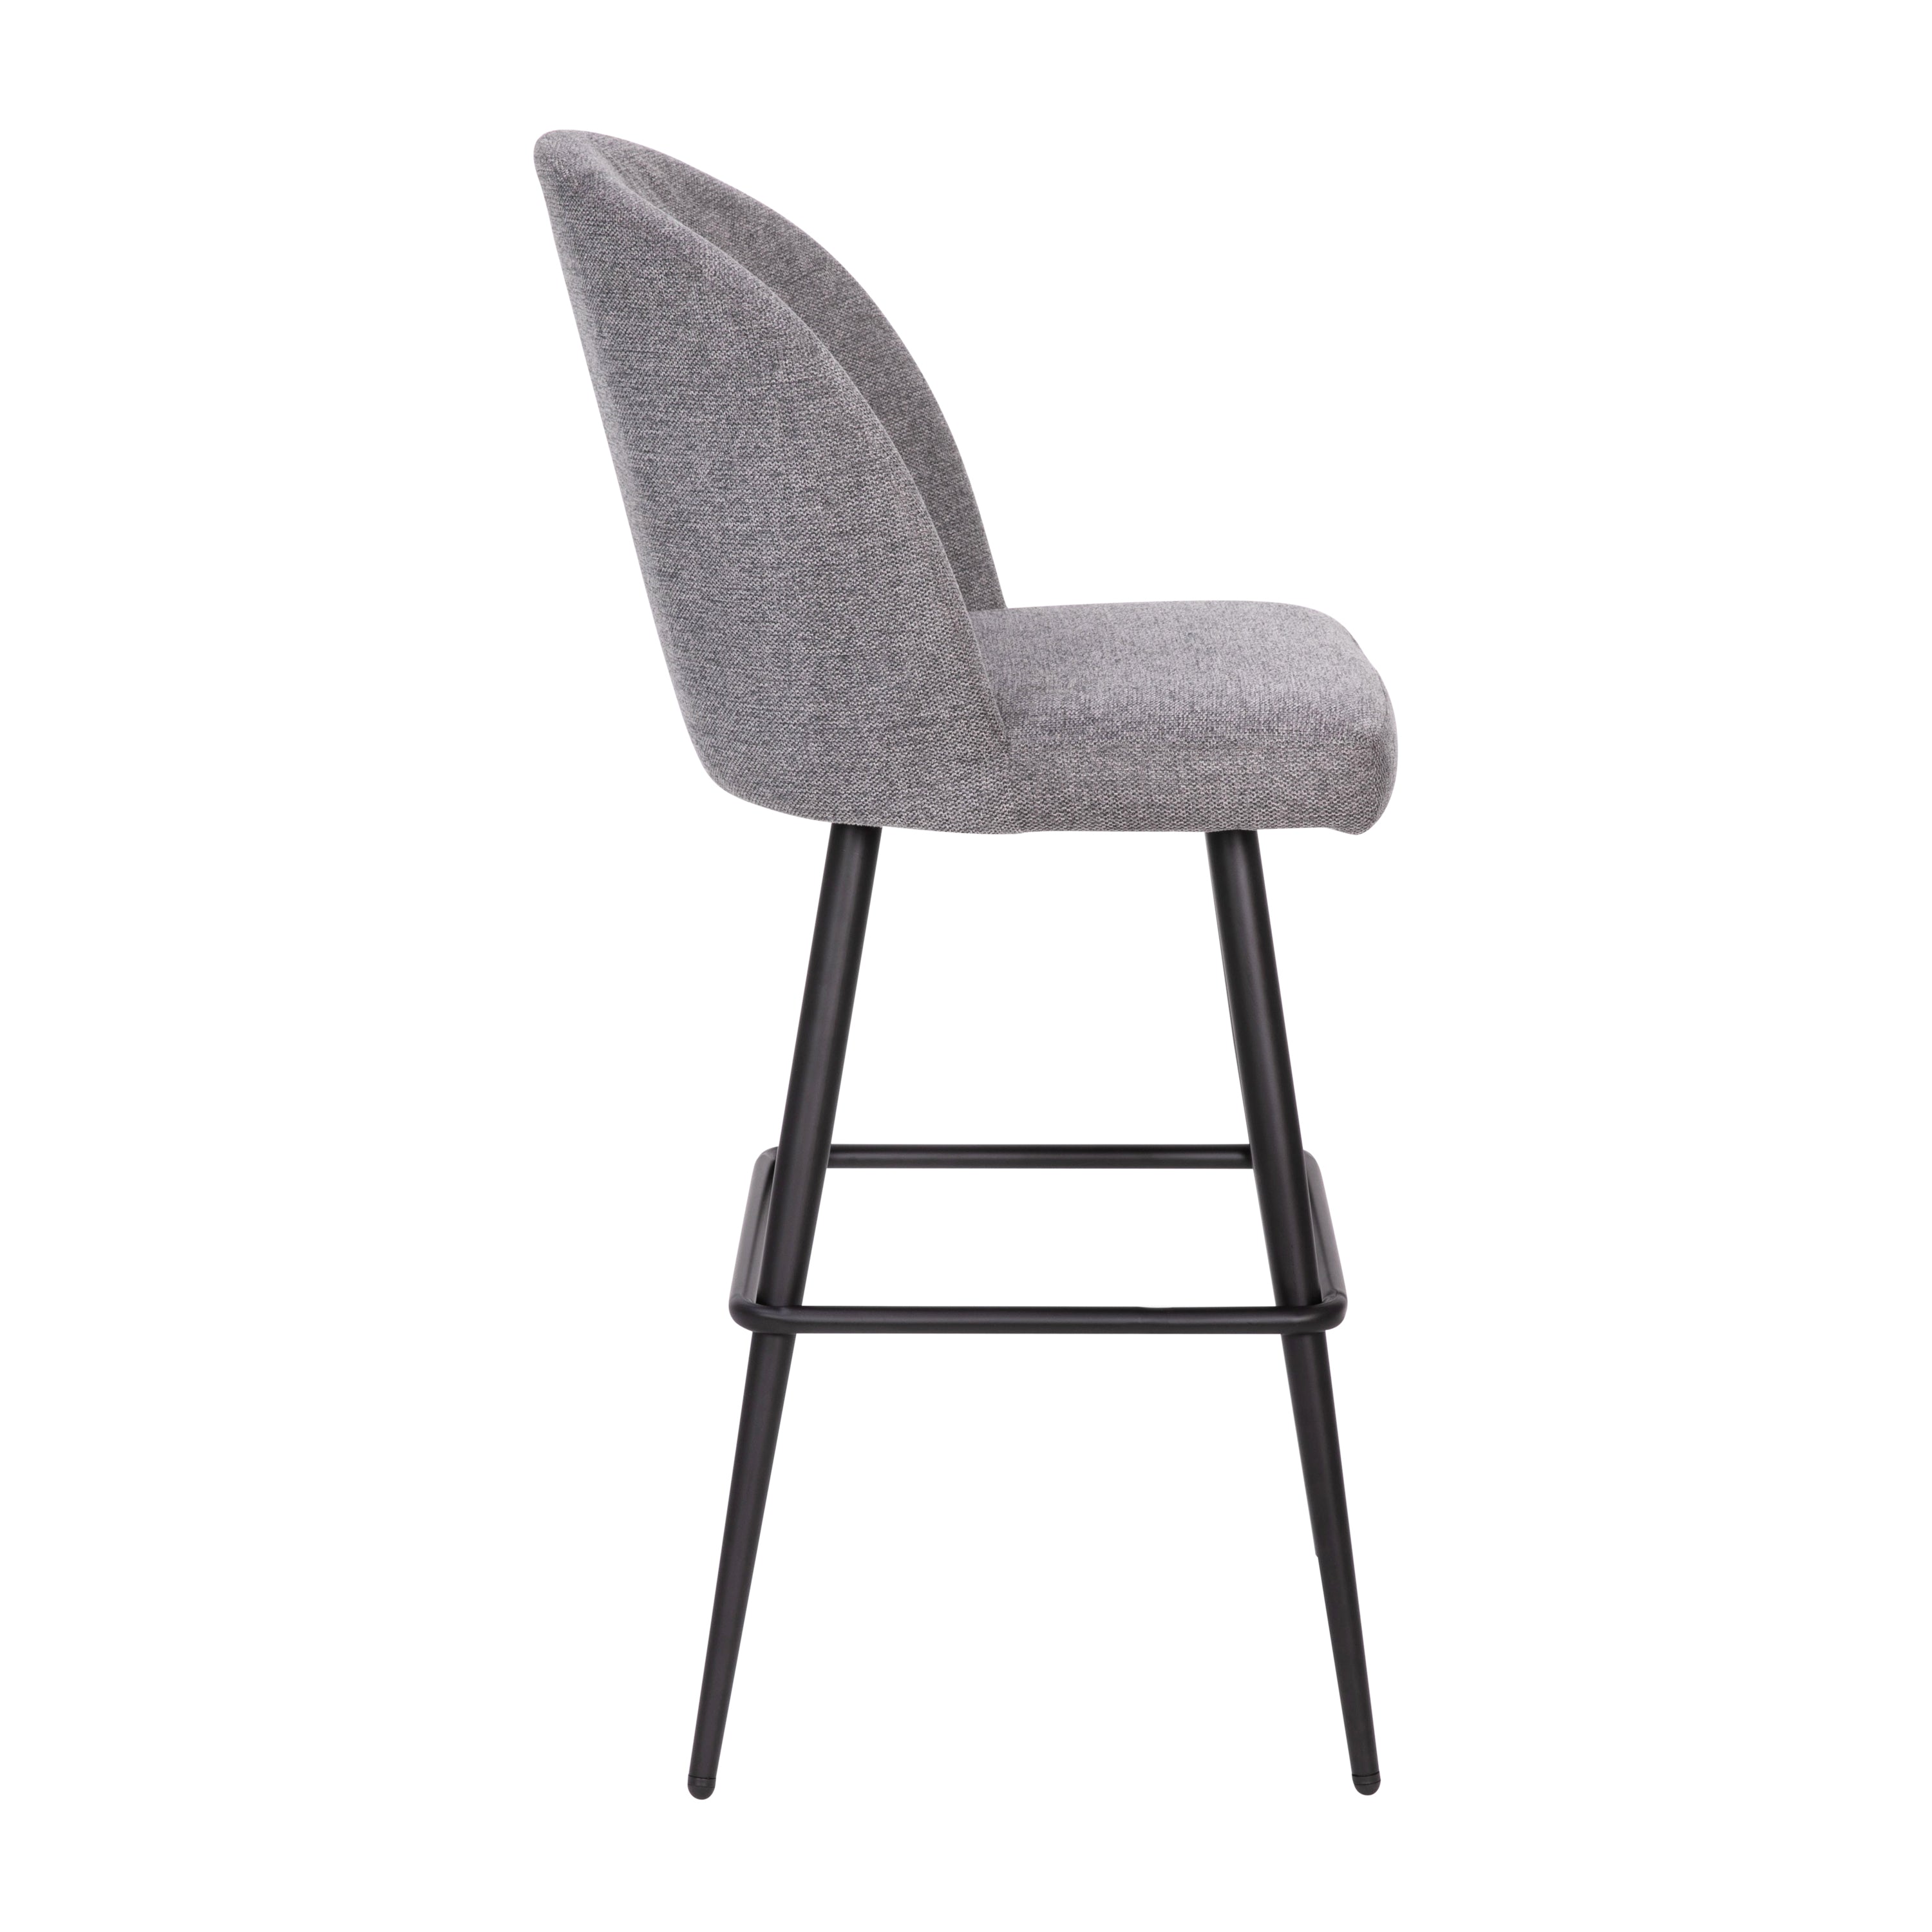 Lyla Commercial Grade Modern Armless Barstools with Contoured Backrest, Steel Frame and Integrated Footrest - Set of 2-Barstool-Flash Furniture-Wall2Wall Furnishings